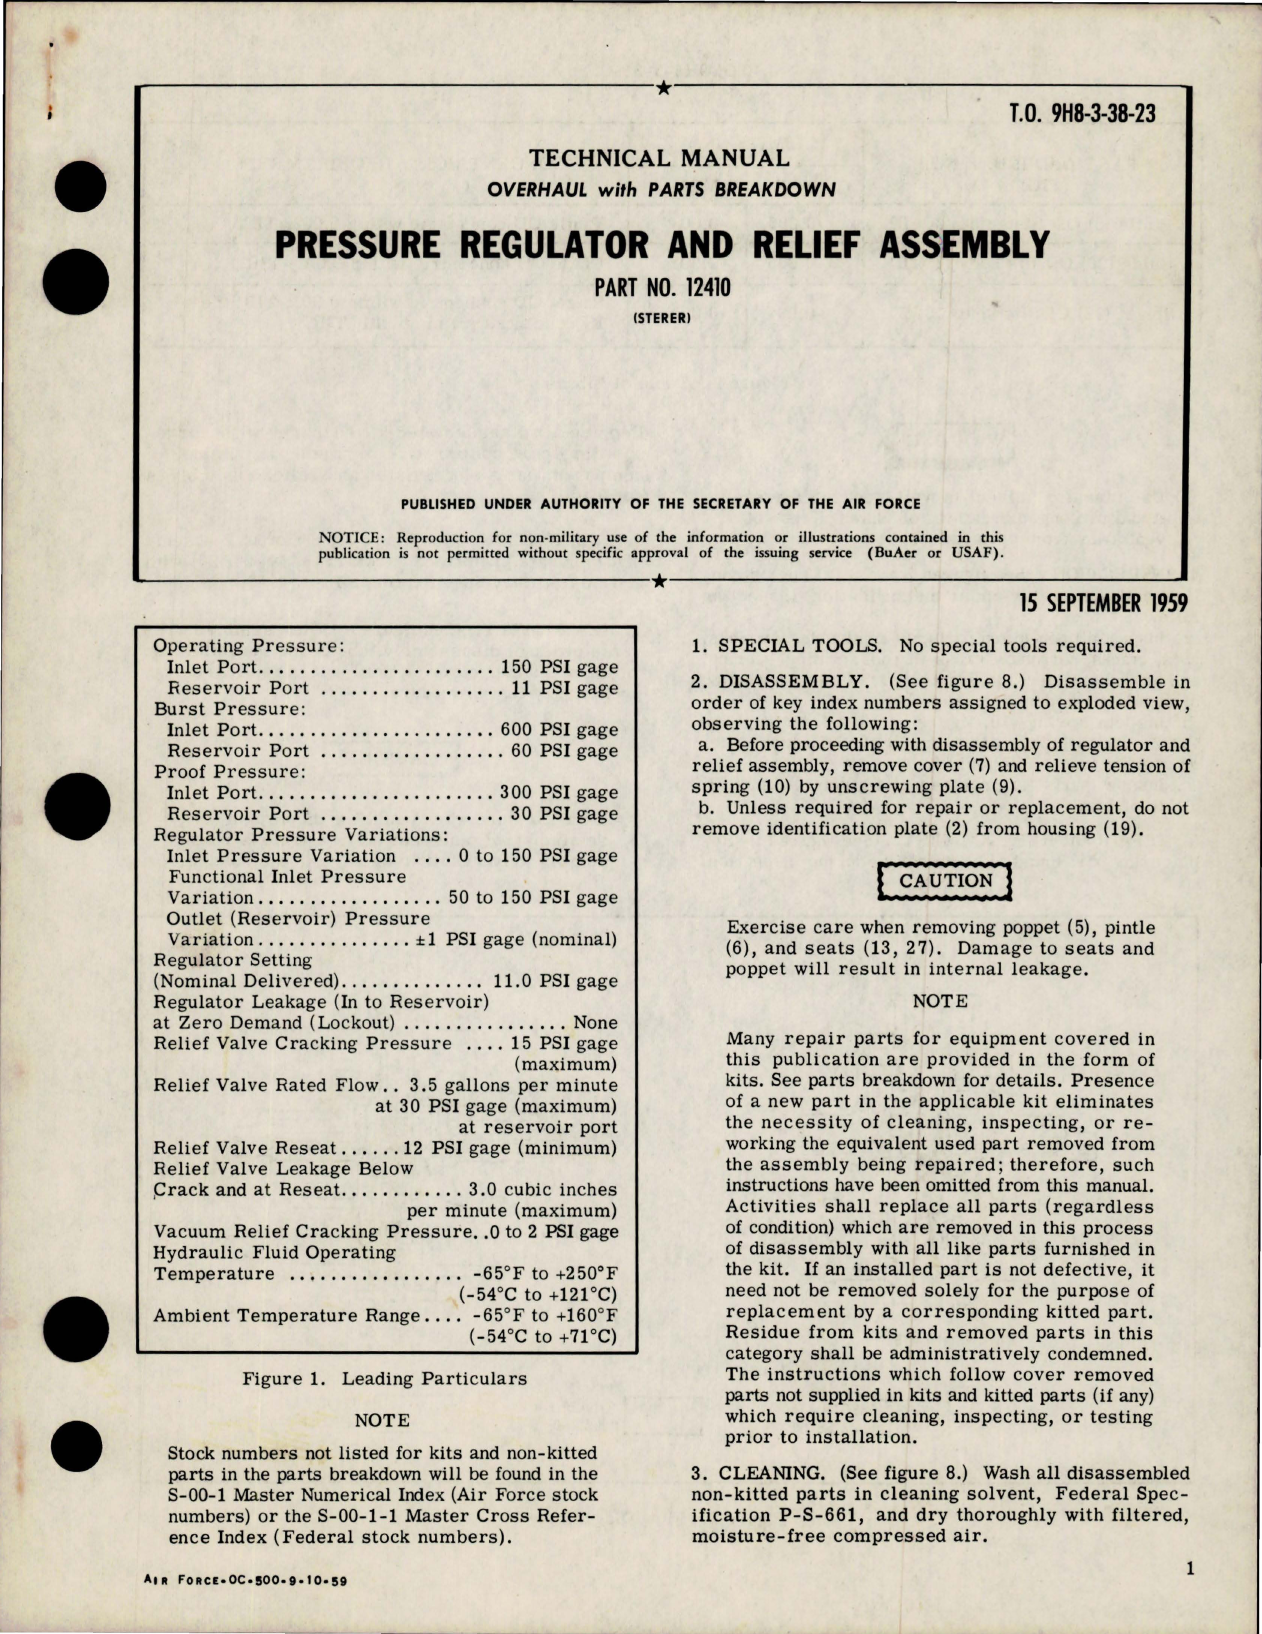 Sample page 1 from AirCorps Library document: Overhaul with Parts Breakdown for Pressure Regulator and Relief Assembly - Part 12410  